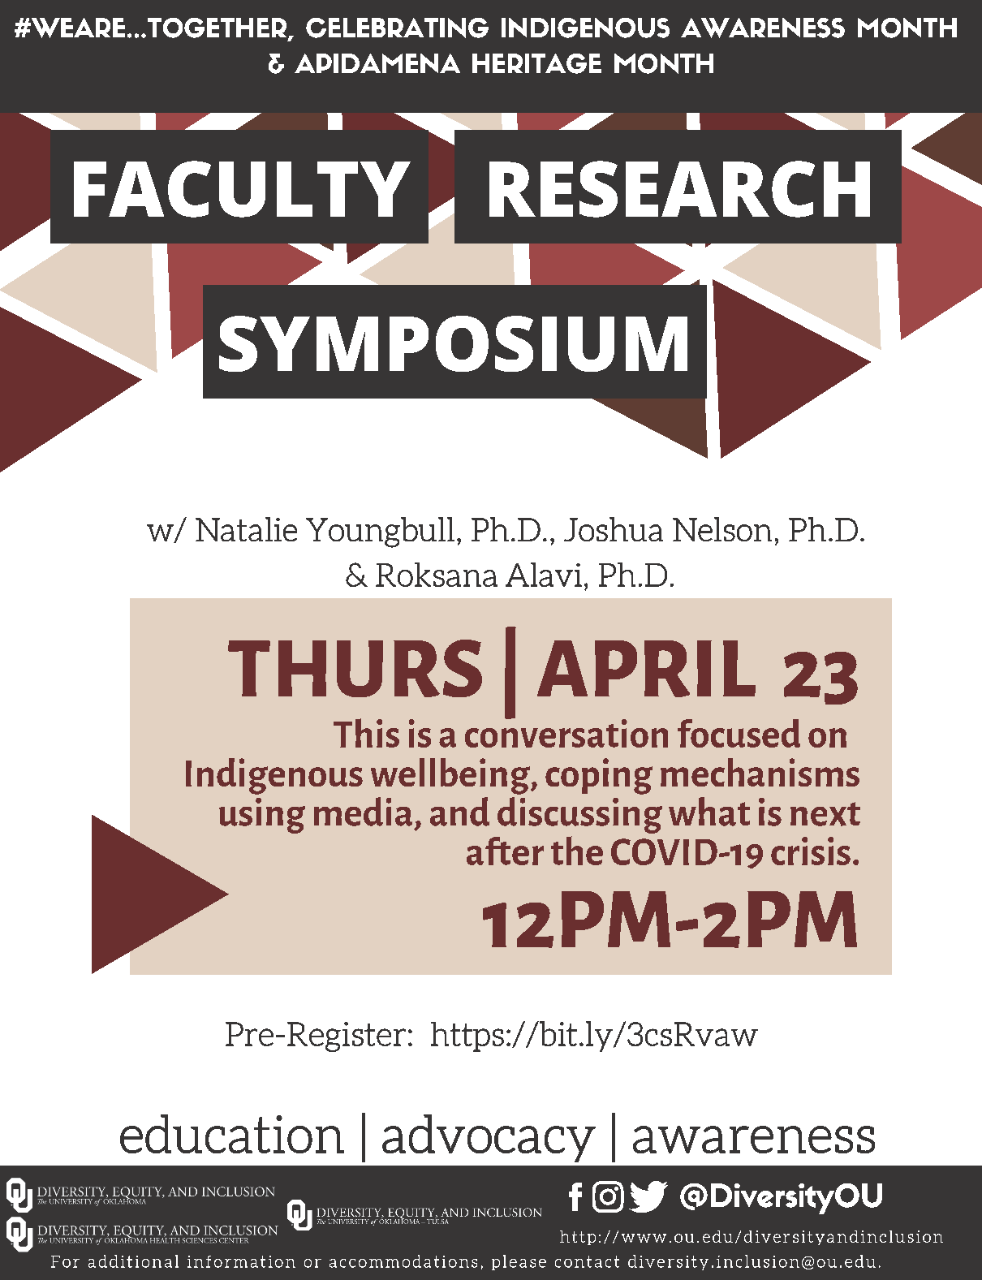 Faculty Research Symposium w/Natalie Youngbull PHD Joshua Nelson PHD & Roksana Alavi PHDThurs April 23 12PM-2PM This is a conversation focused on indigenous wellbeing, coping mechanisms using media, and discussing what is next after the COVID-19 crisis. Pre-Register bit.ly/3csRvaw